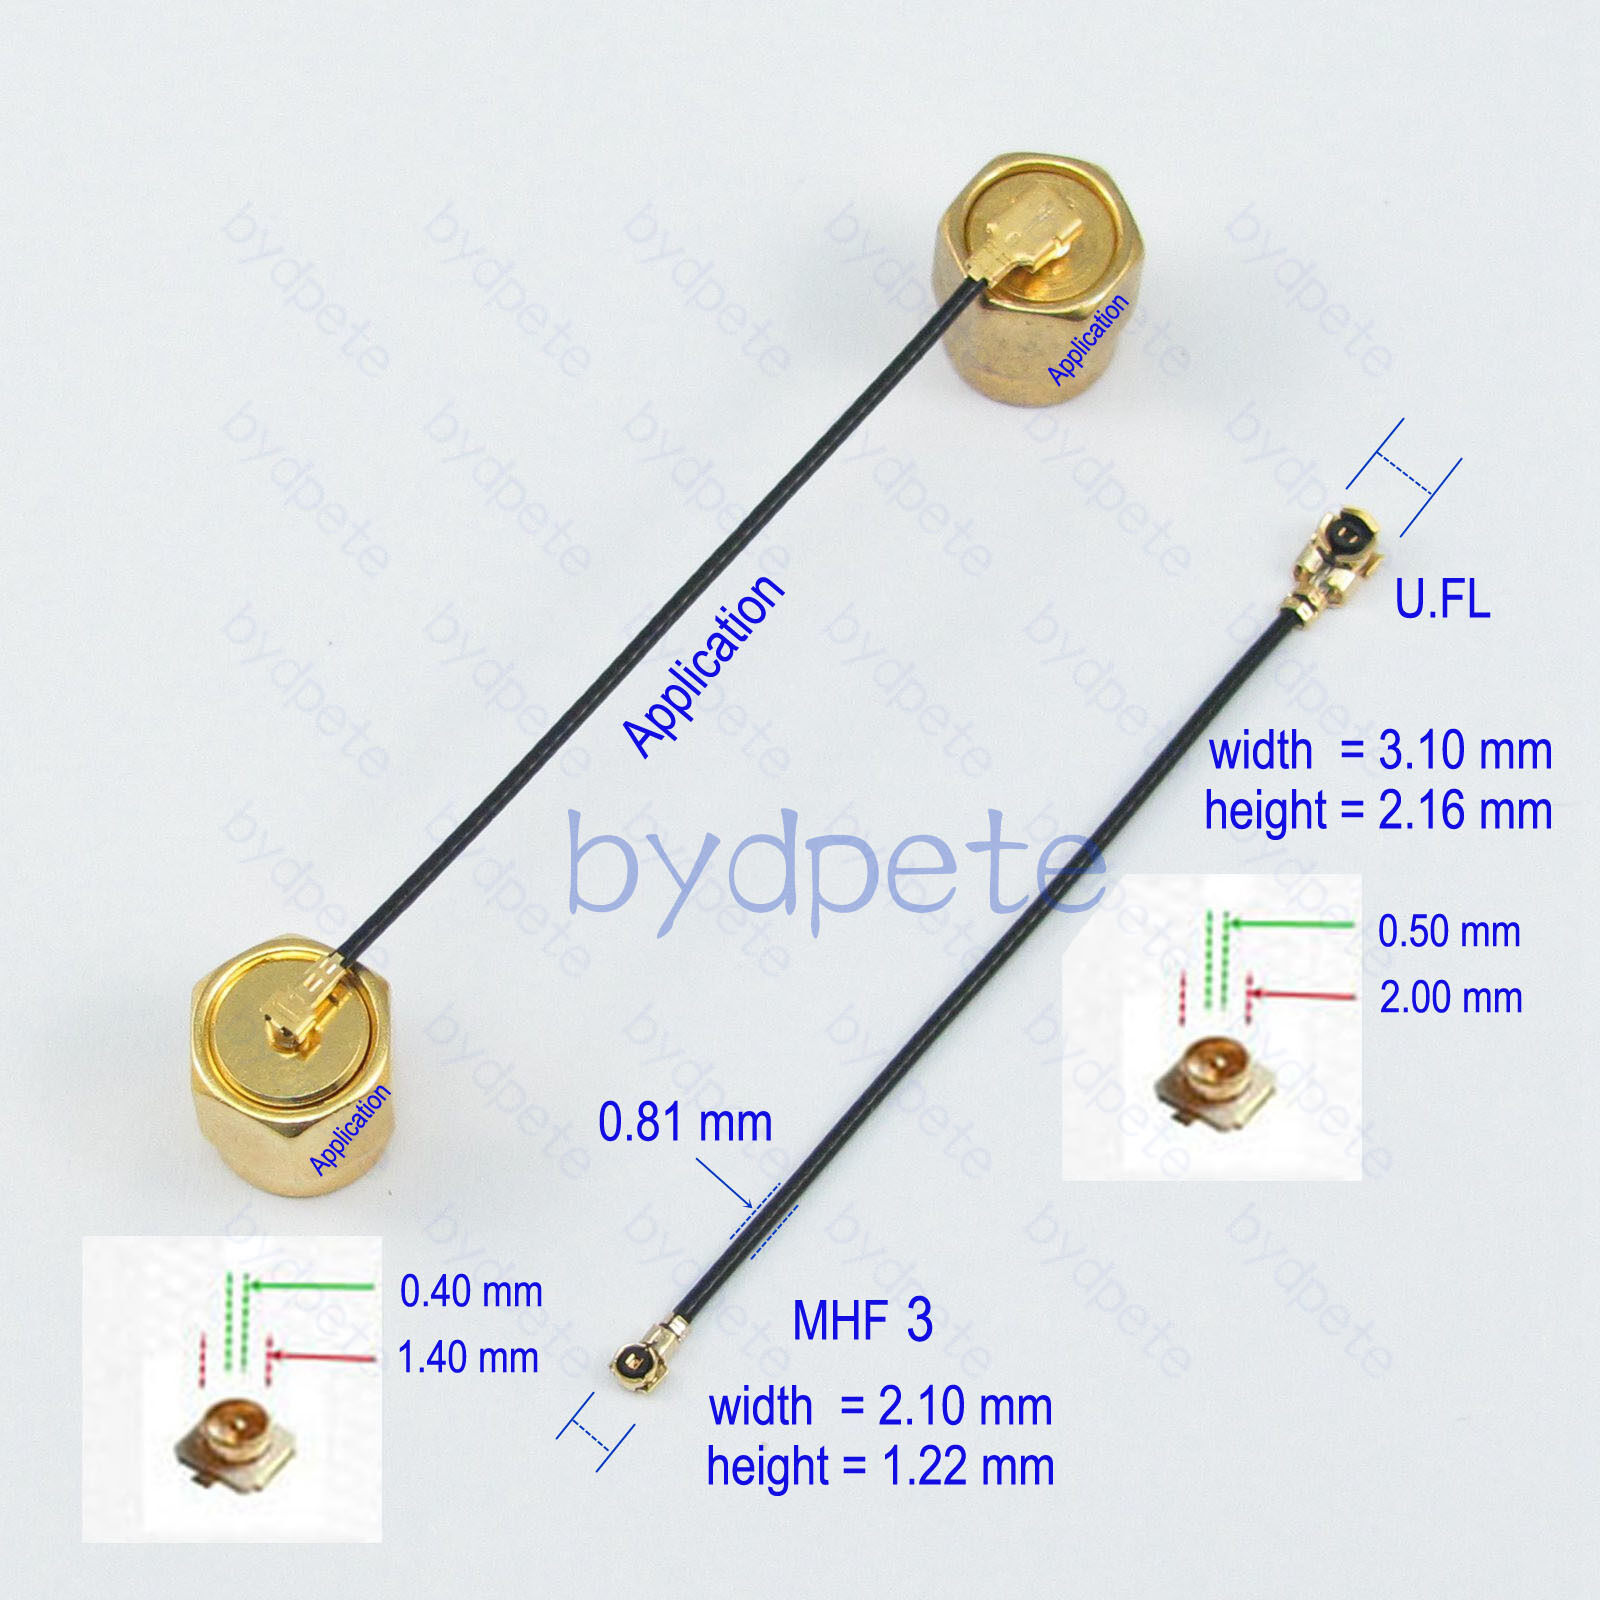 MHF3 III to U.FL IPX IPEX 0.81mm Pigtail Coax Jumper 2in Cable 5cm router wifi "